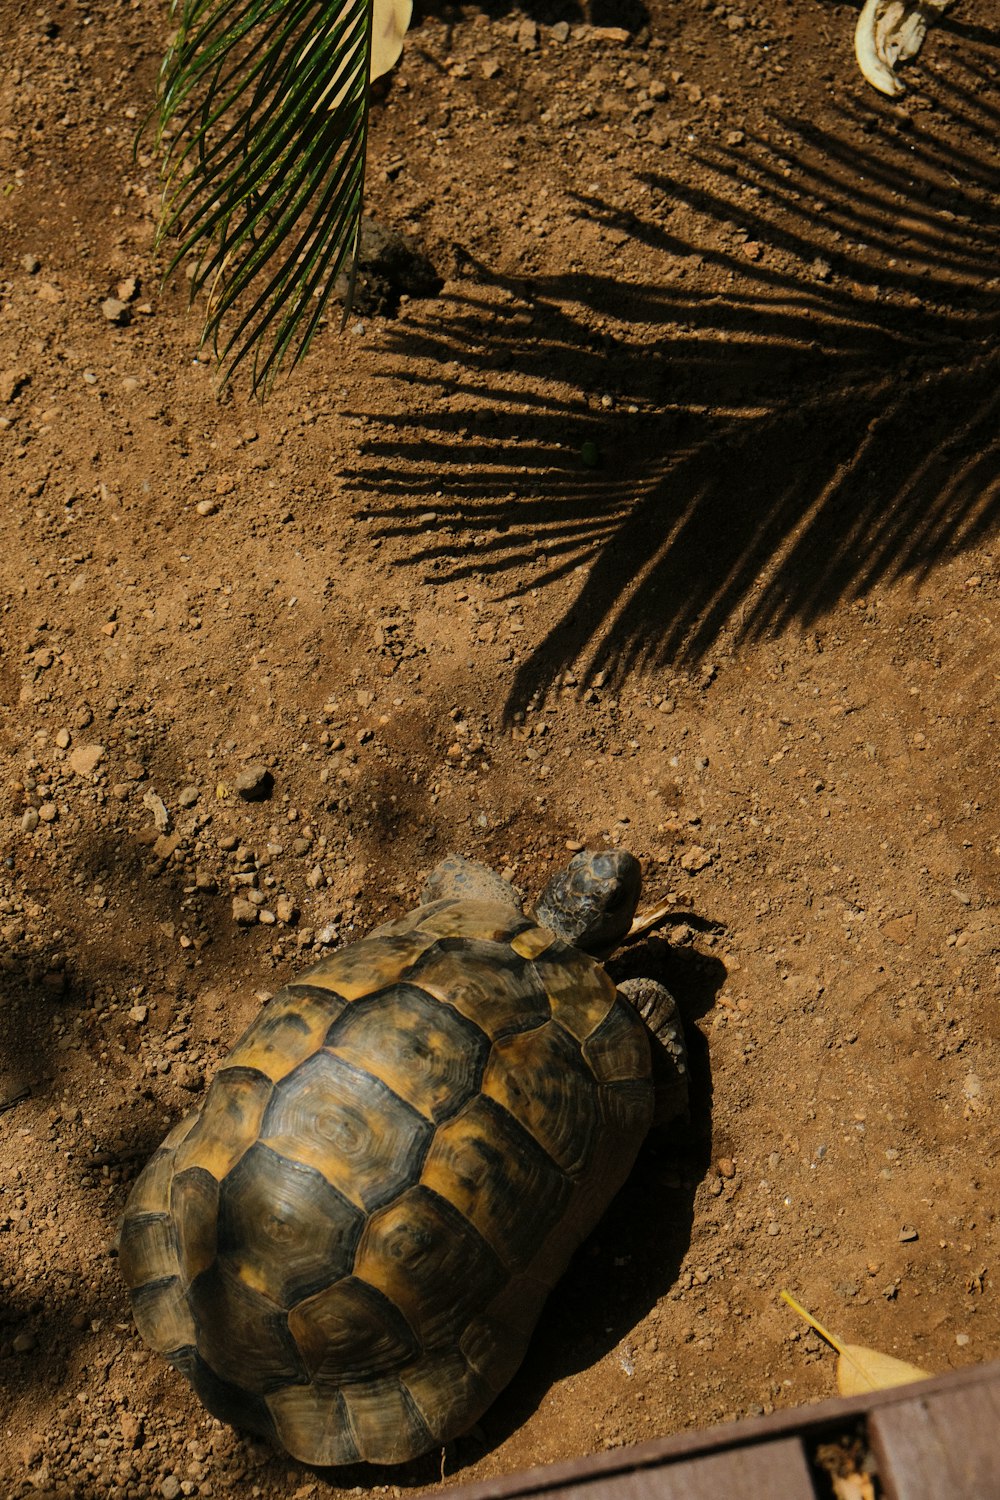 a tortoise laying on the ground next to a palm tree